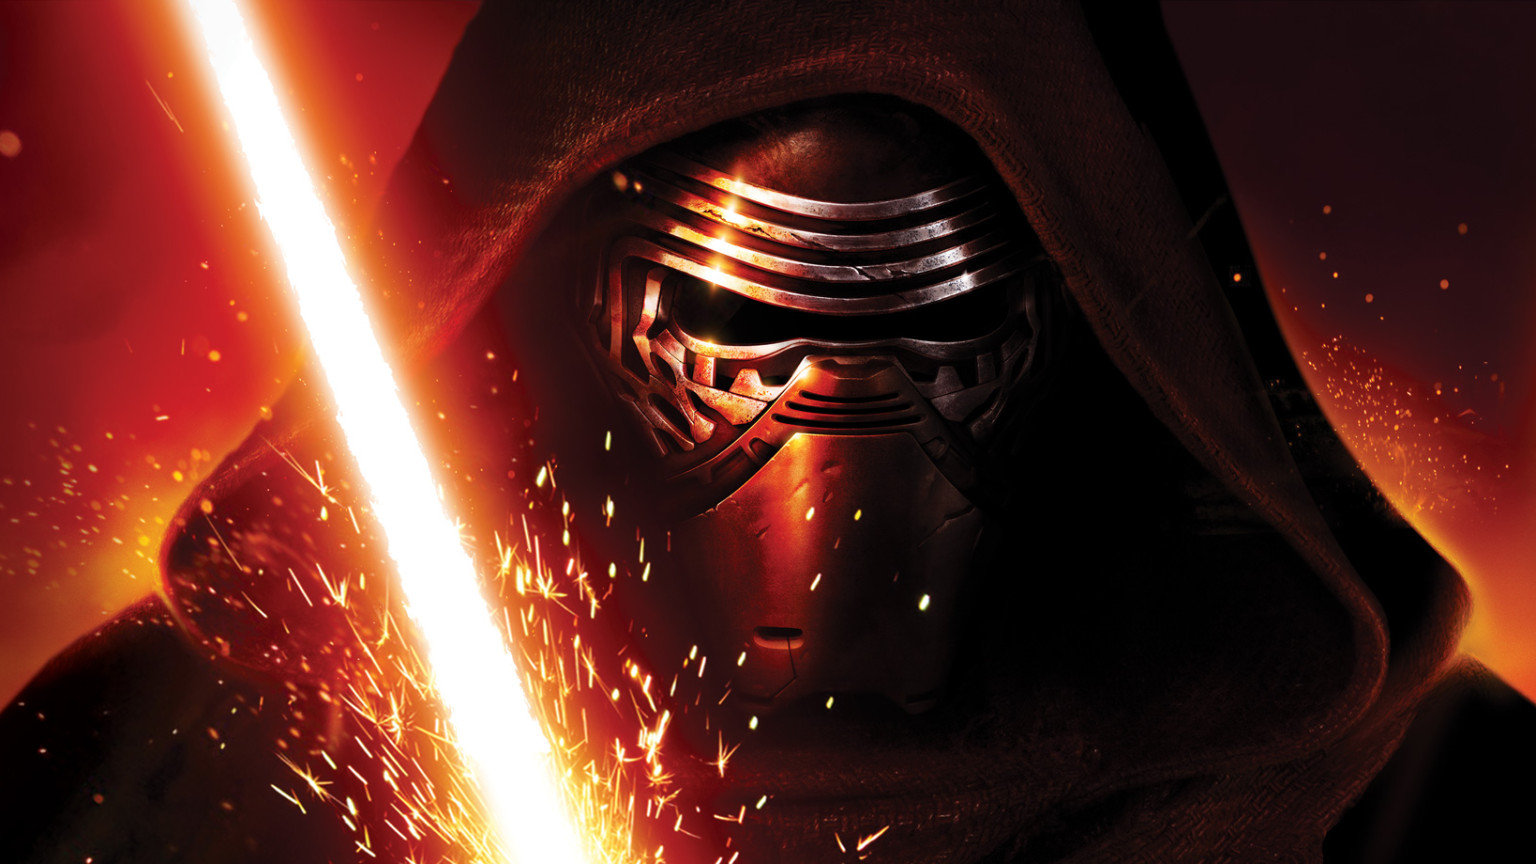 12 New High Resolution Stills from Star Wars: The Force Awakens